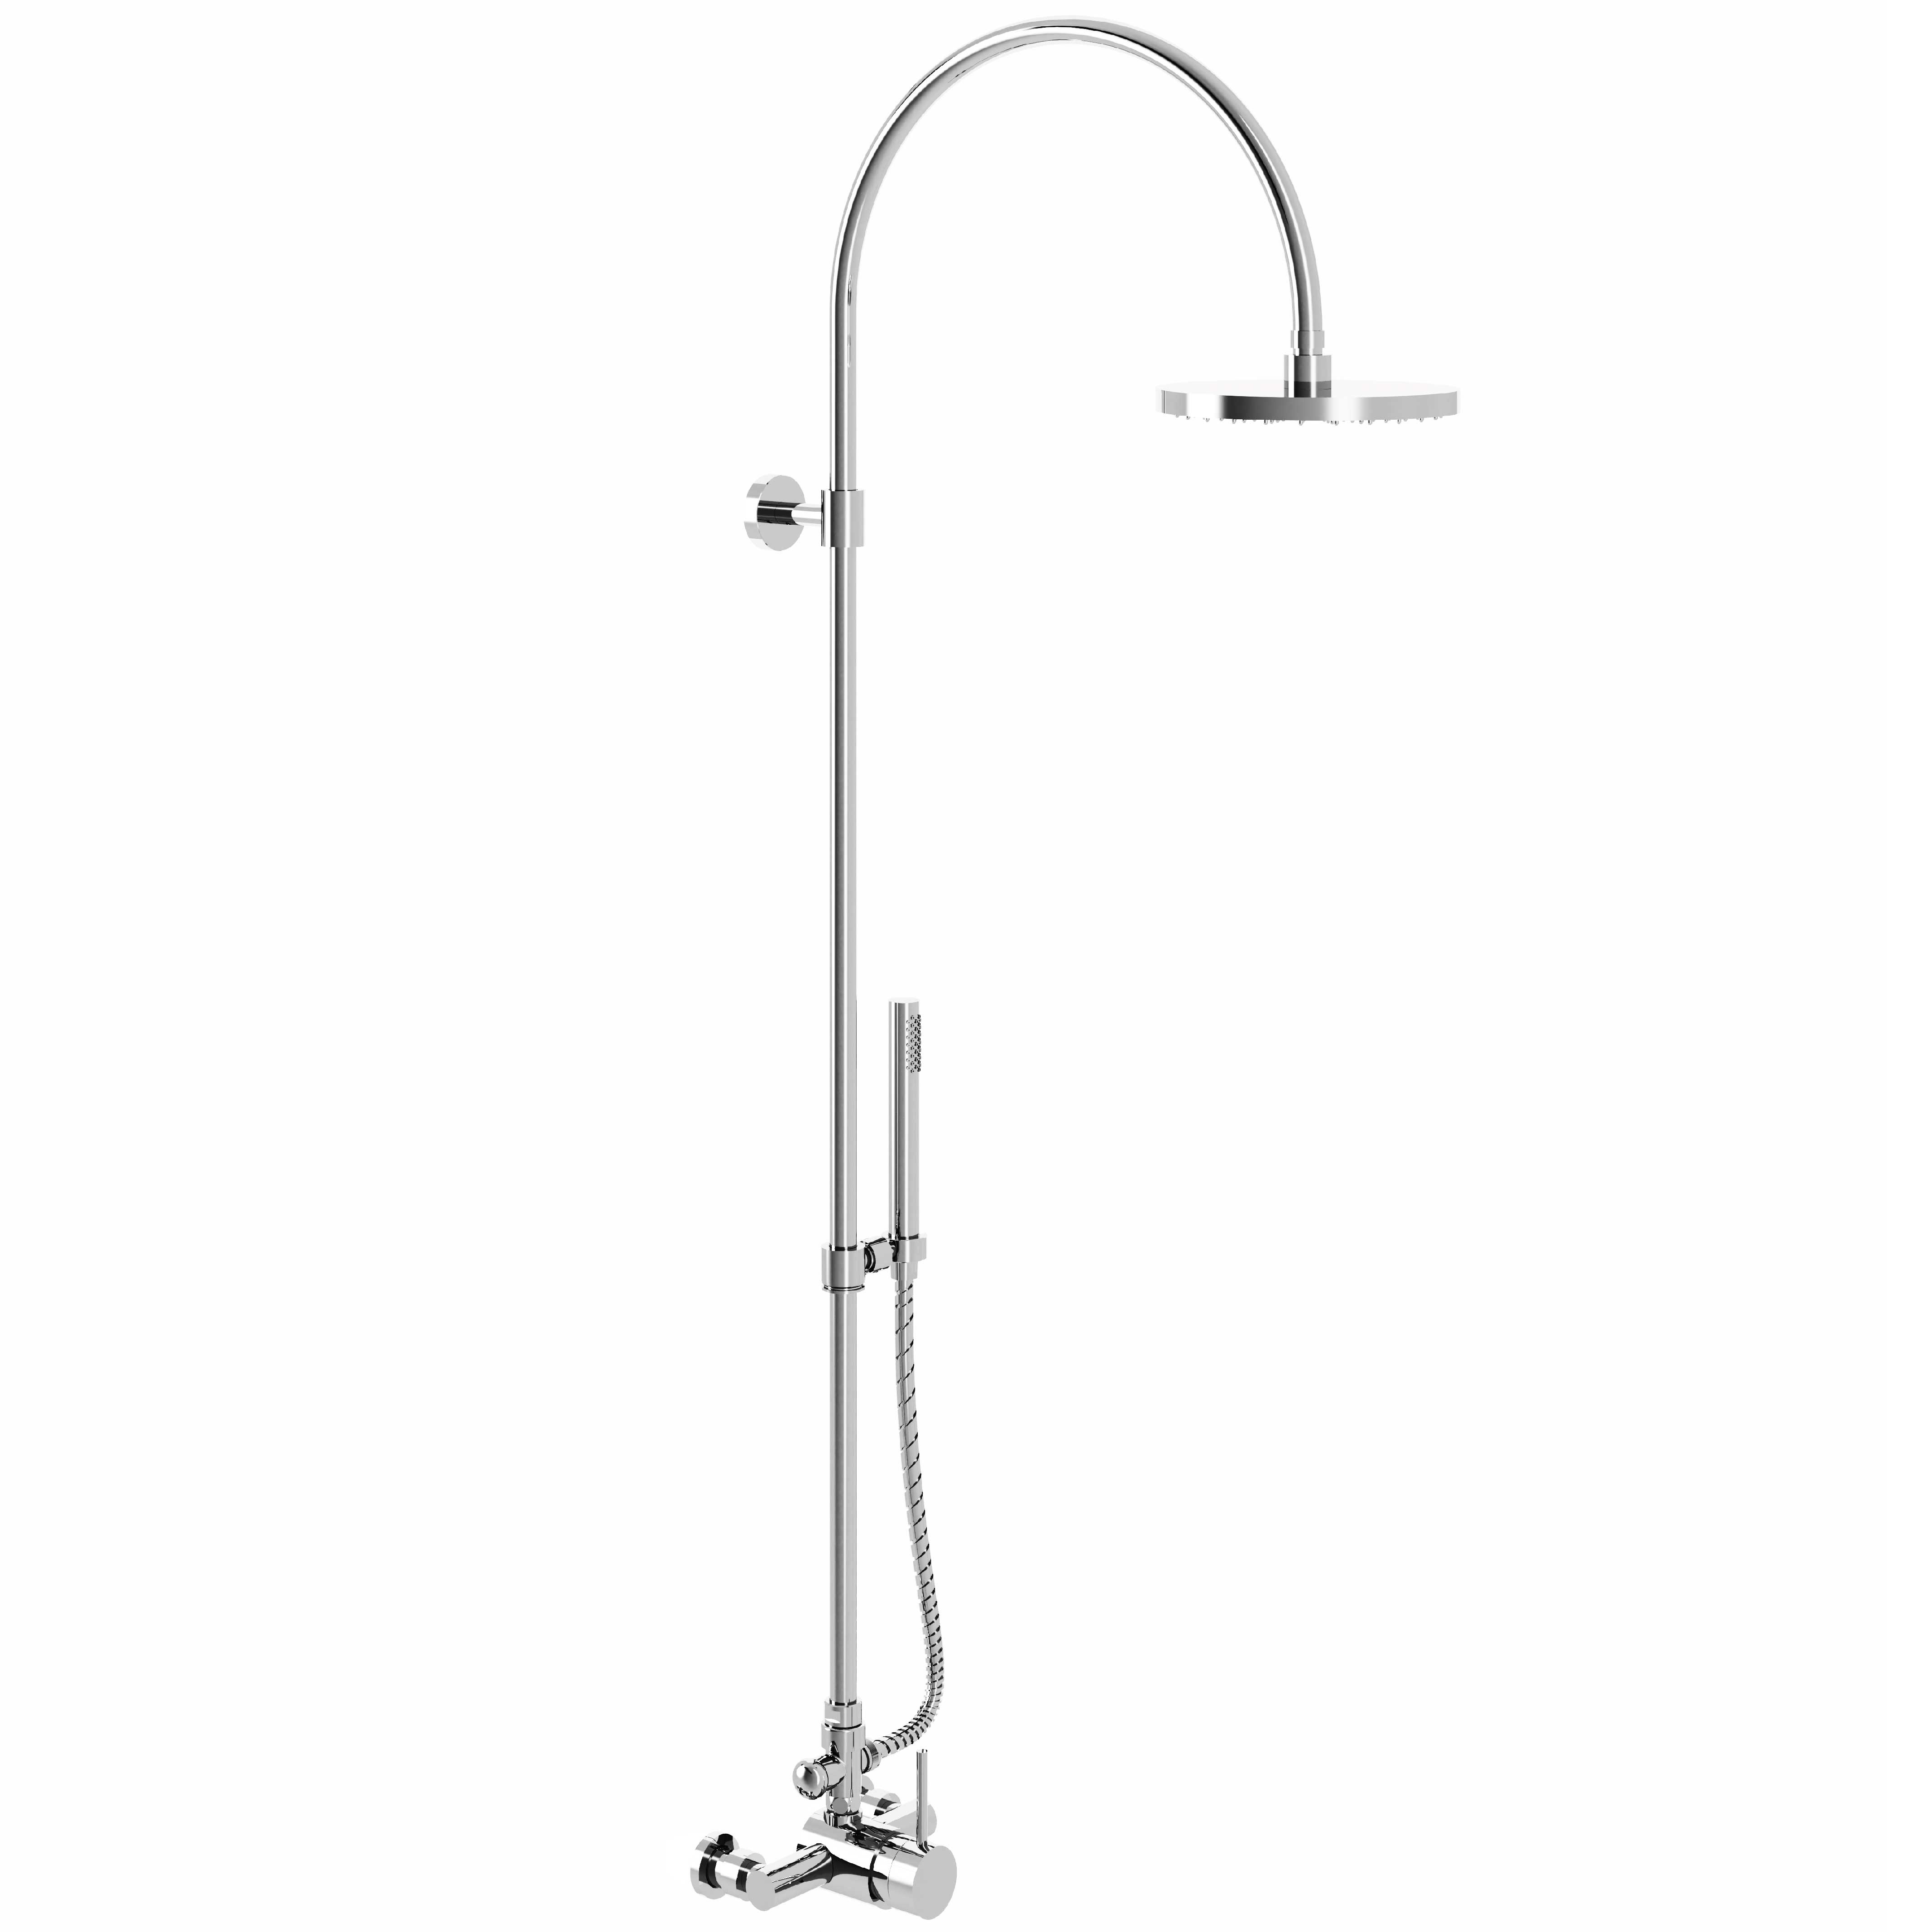 M90-2204M Single-lever shower mixer with column, anti-scaling